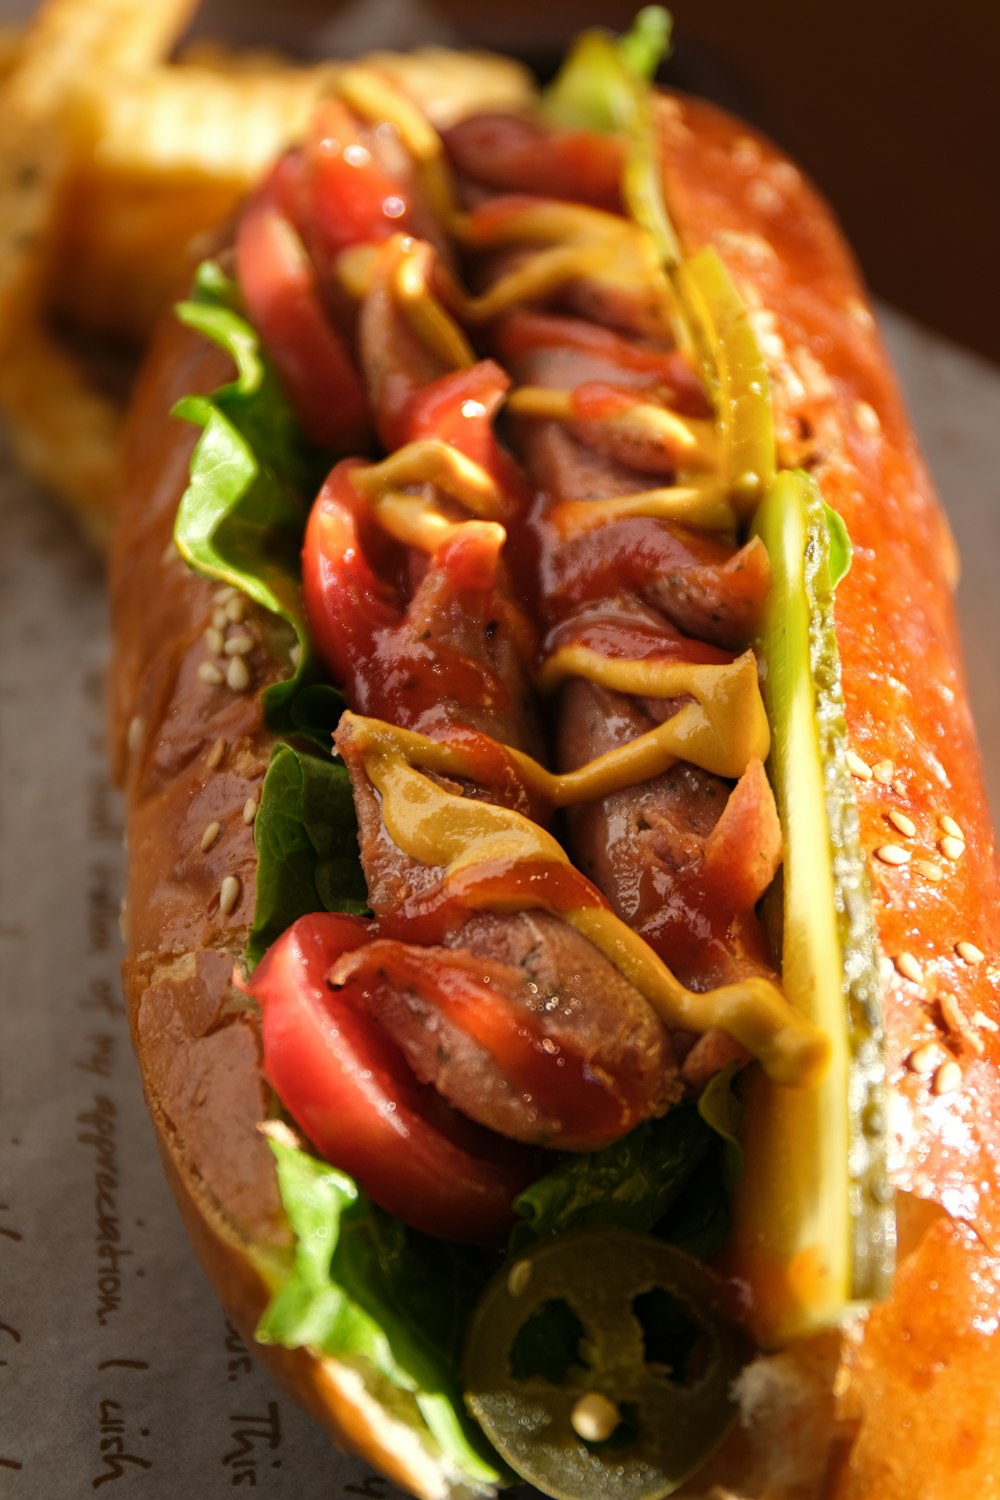 a hot dog with tomatoes, lettuce, and mustard